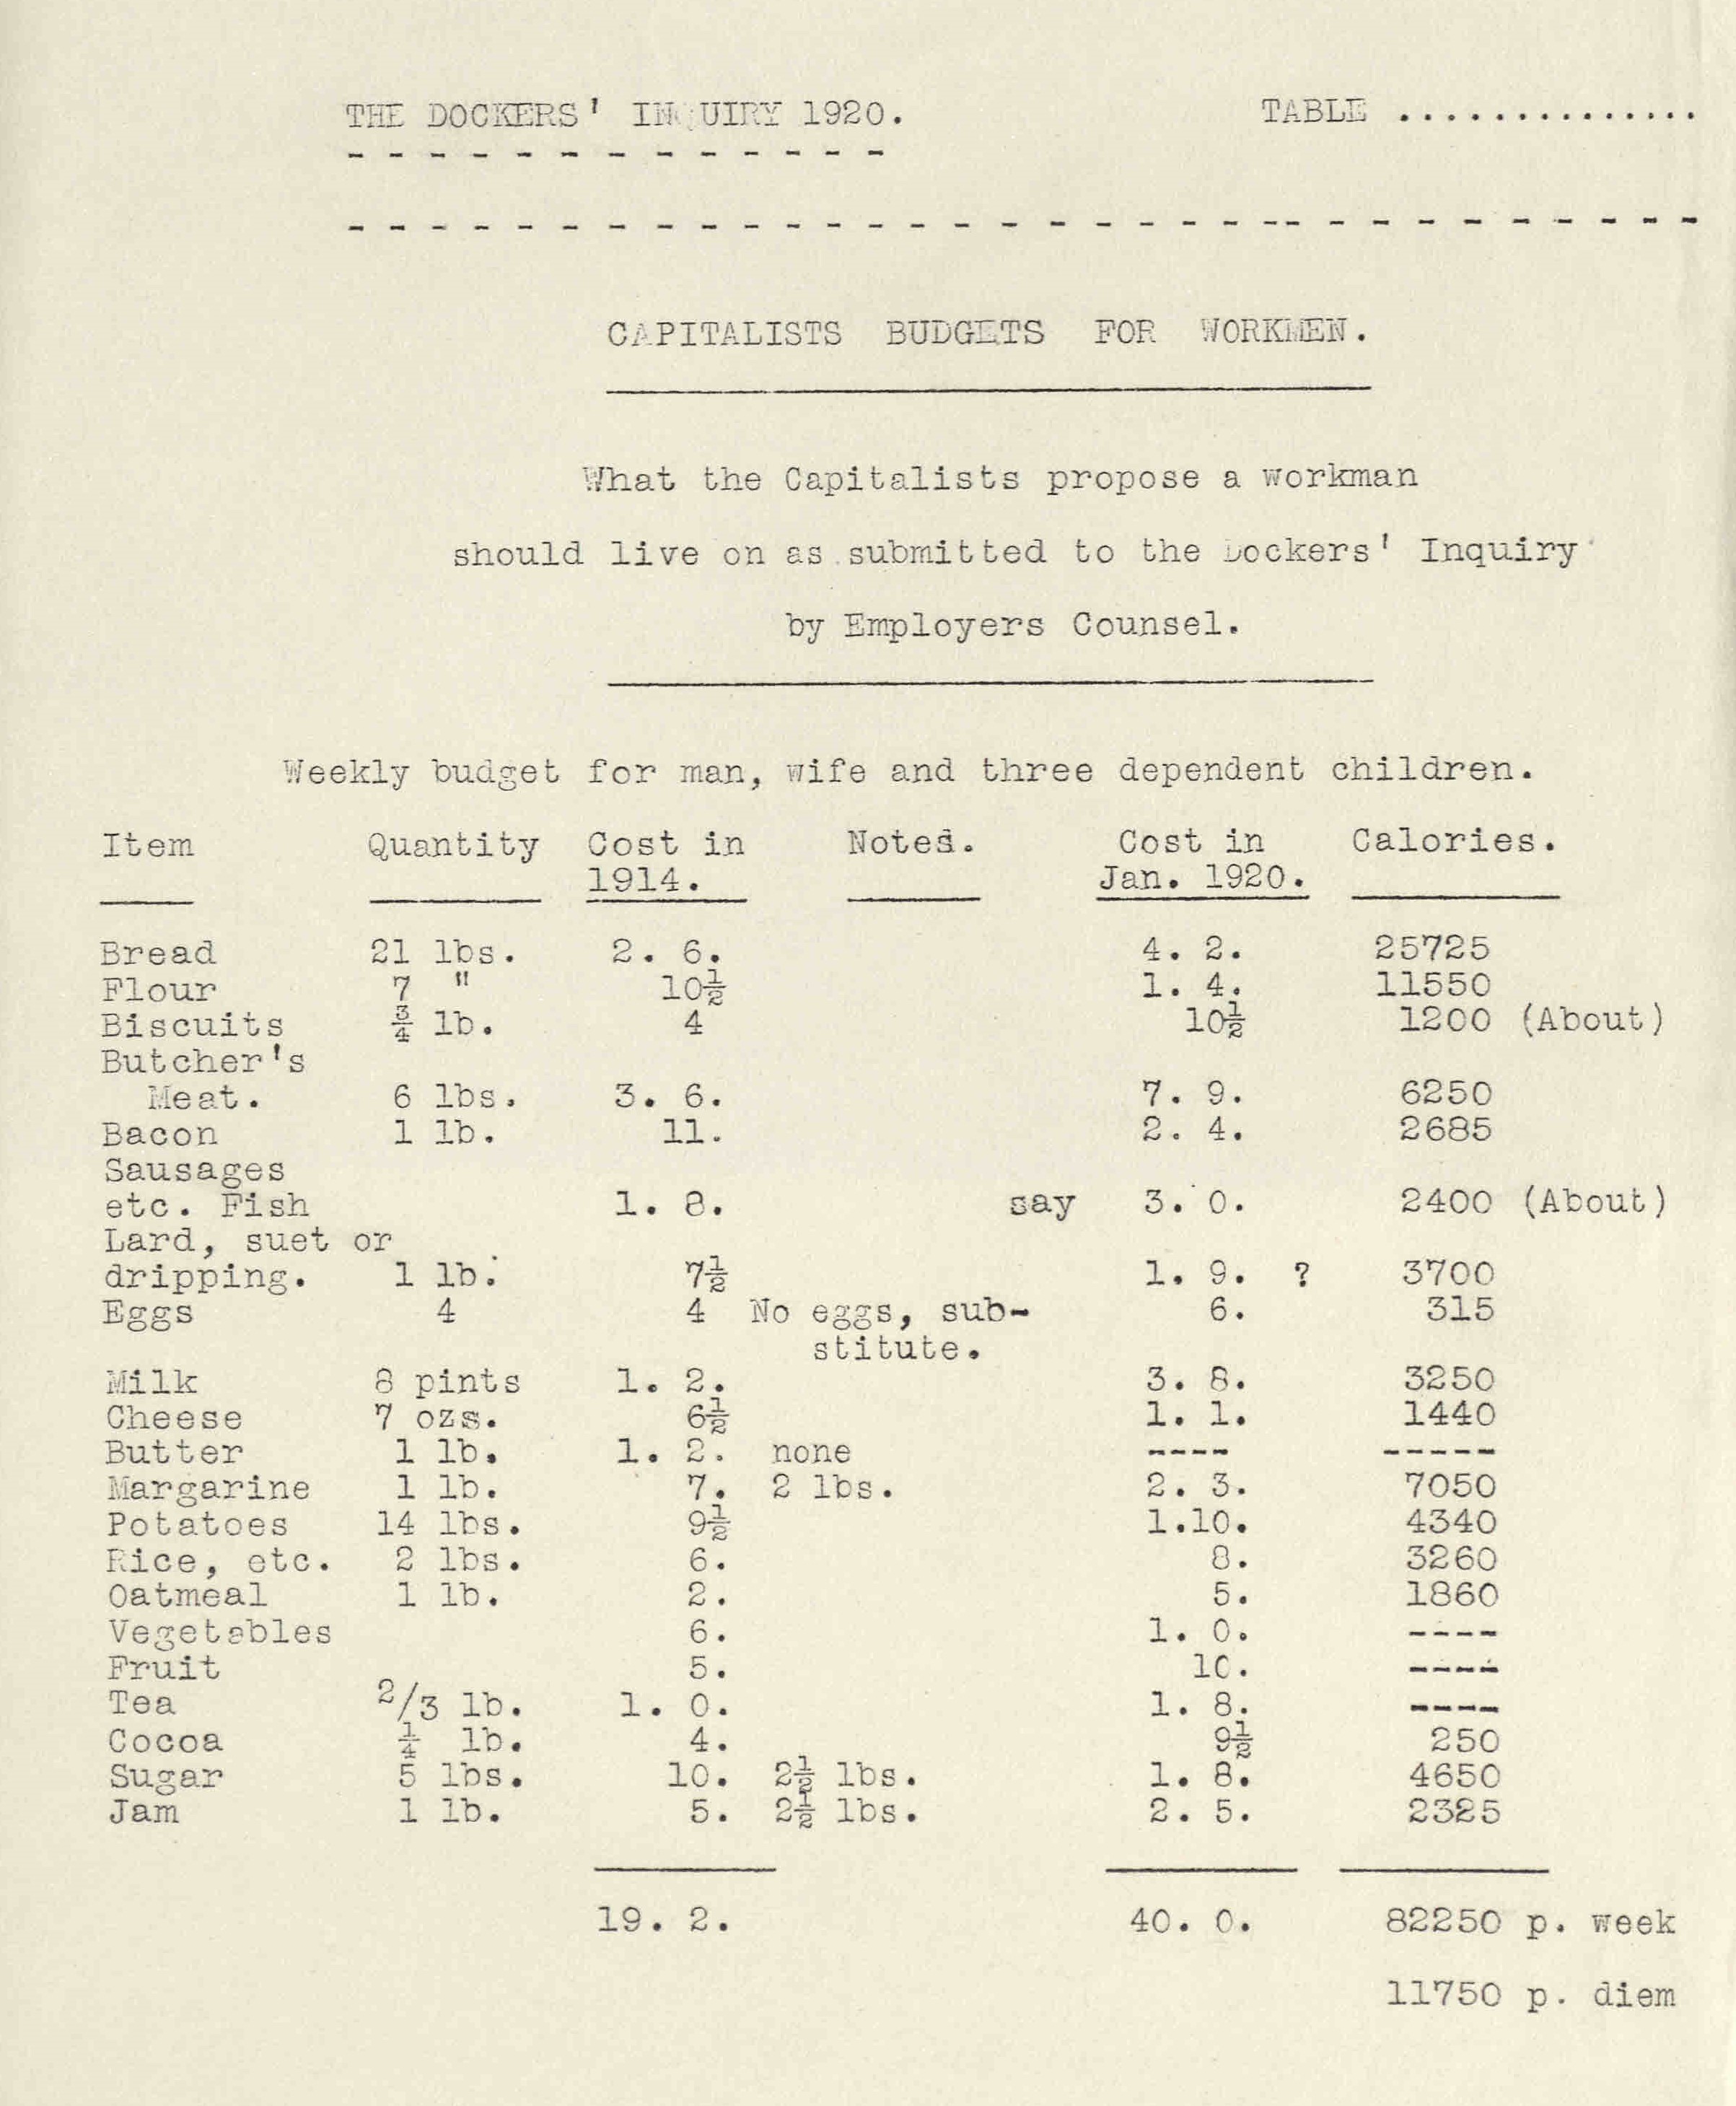 Weekly budget proposed for workmen by the Employers Council to the Dockers Inquiry, it includes comparative figures for 1914 and 1920 (both financial cost and calorific value)